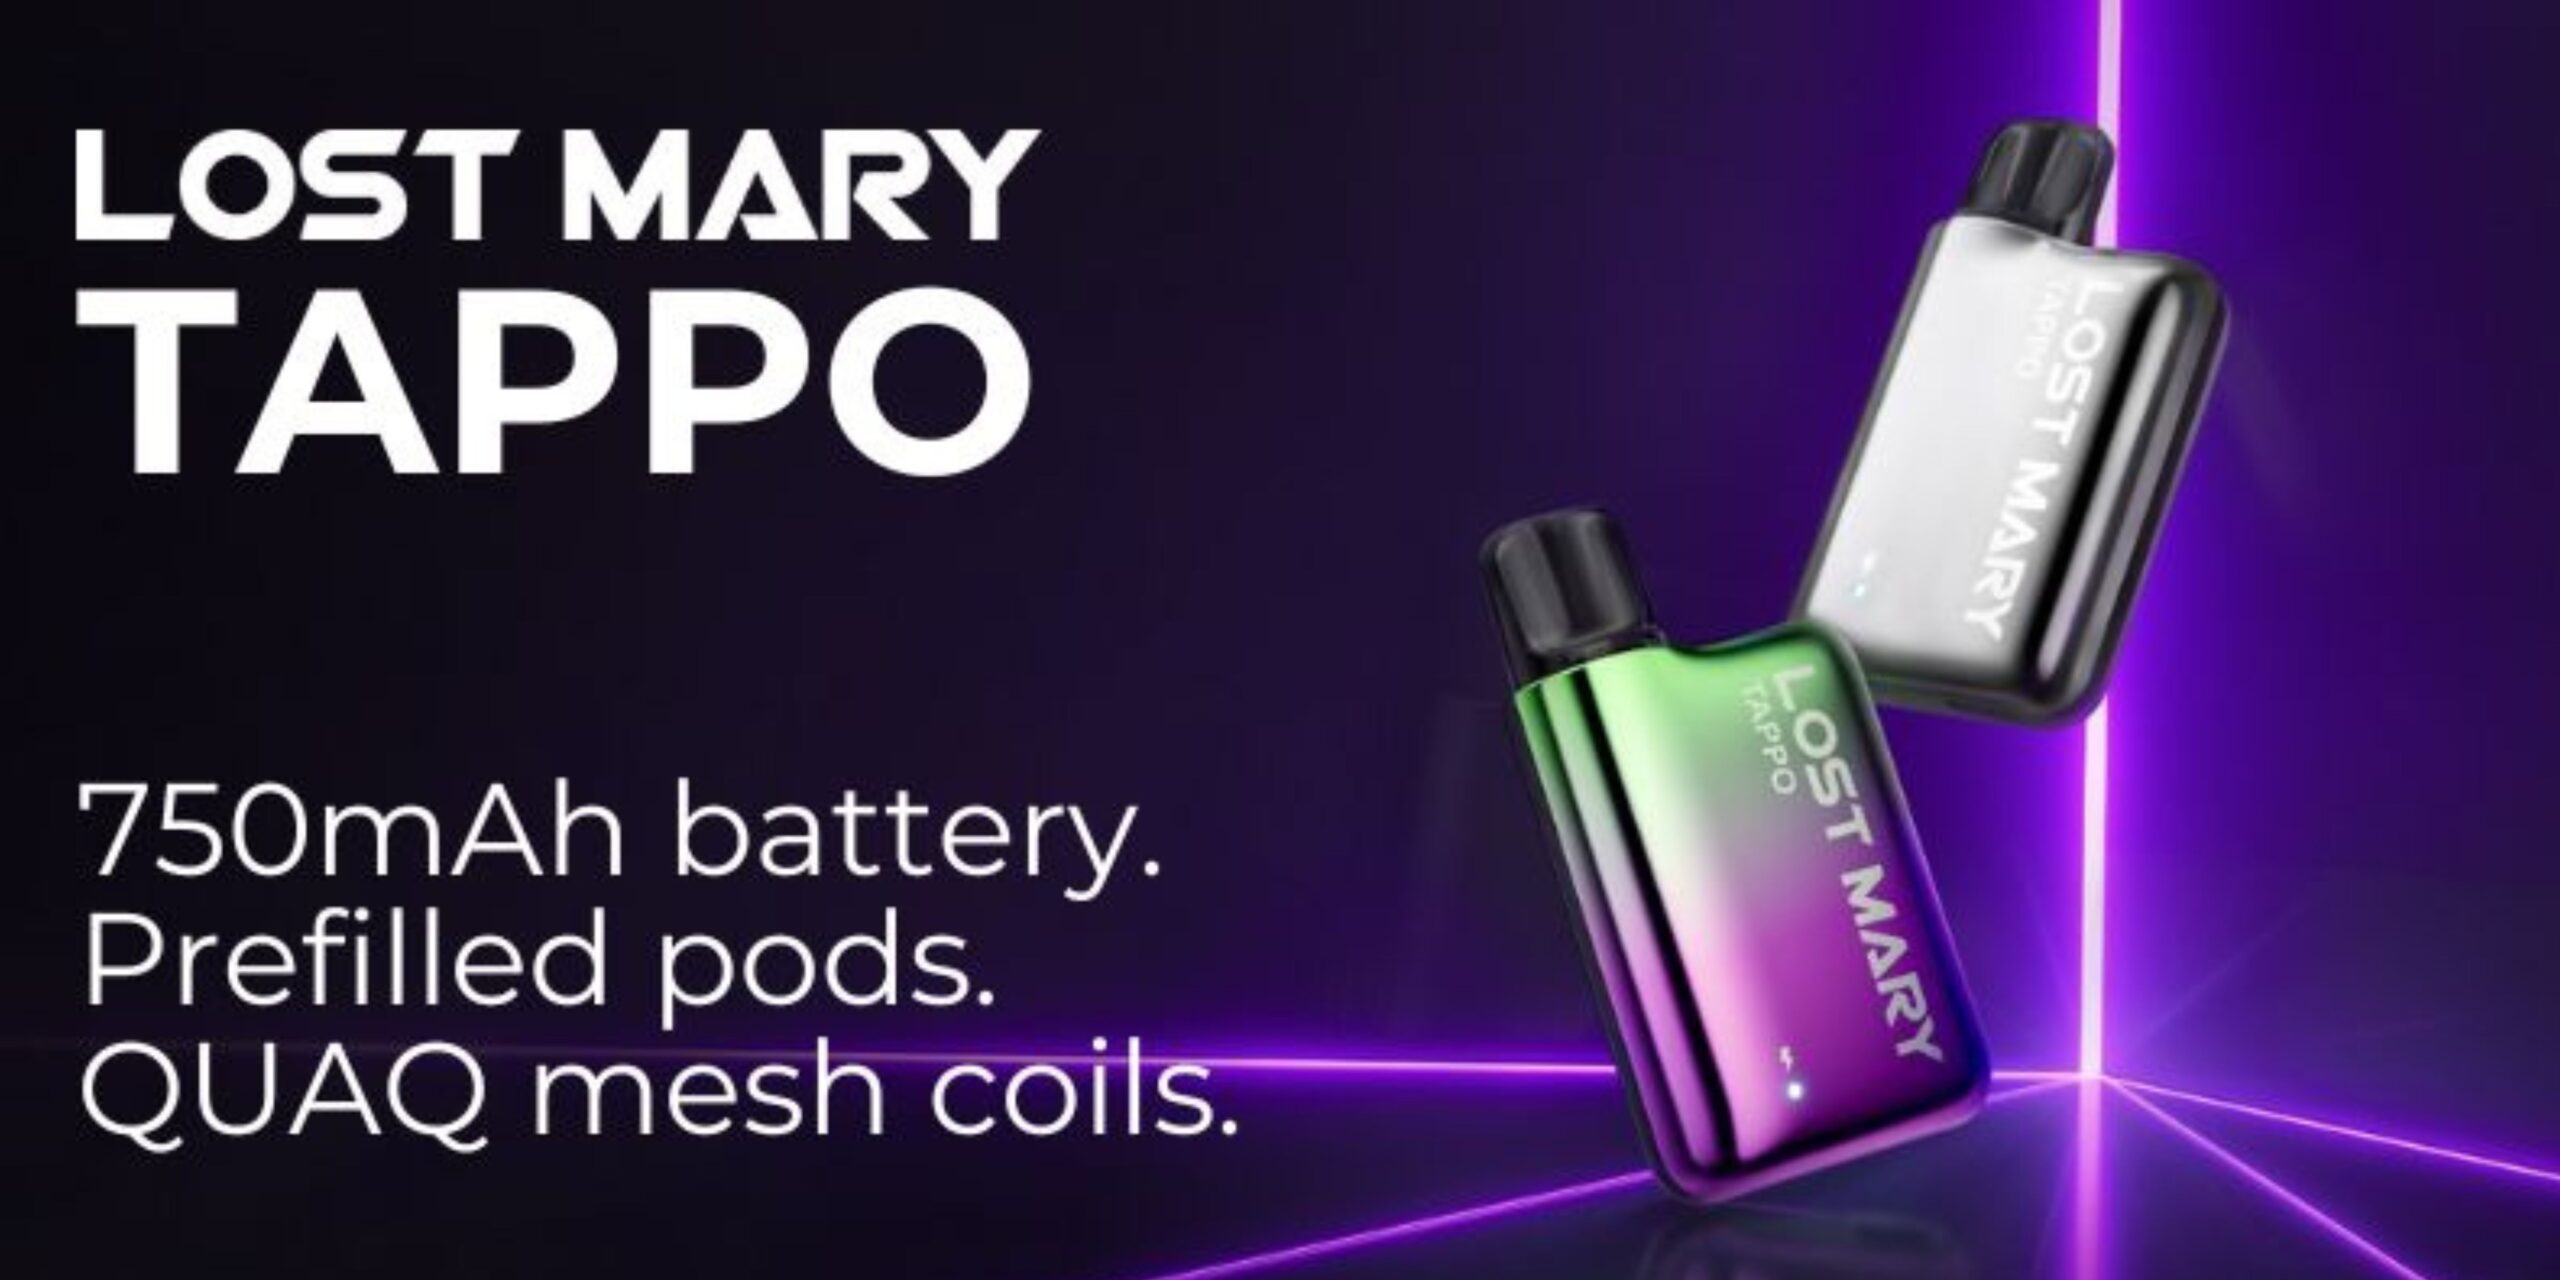 LOST MARY TAPPO – Maryturbo (Replacement Prefilled Pods) VAPING - XMANIA Ireland 14